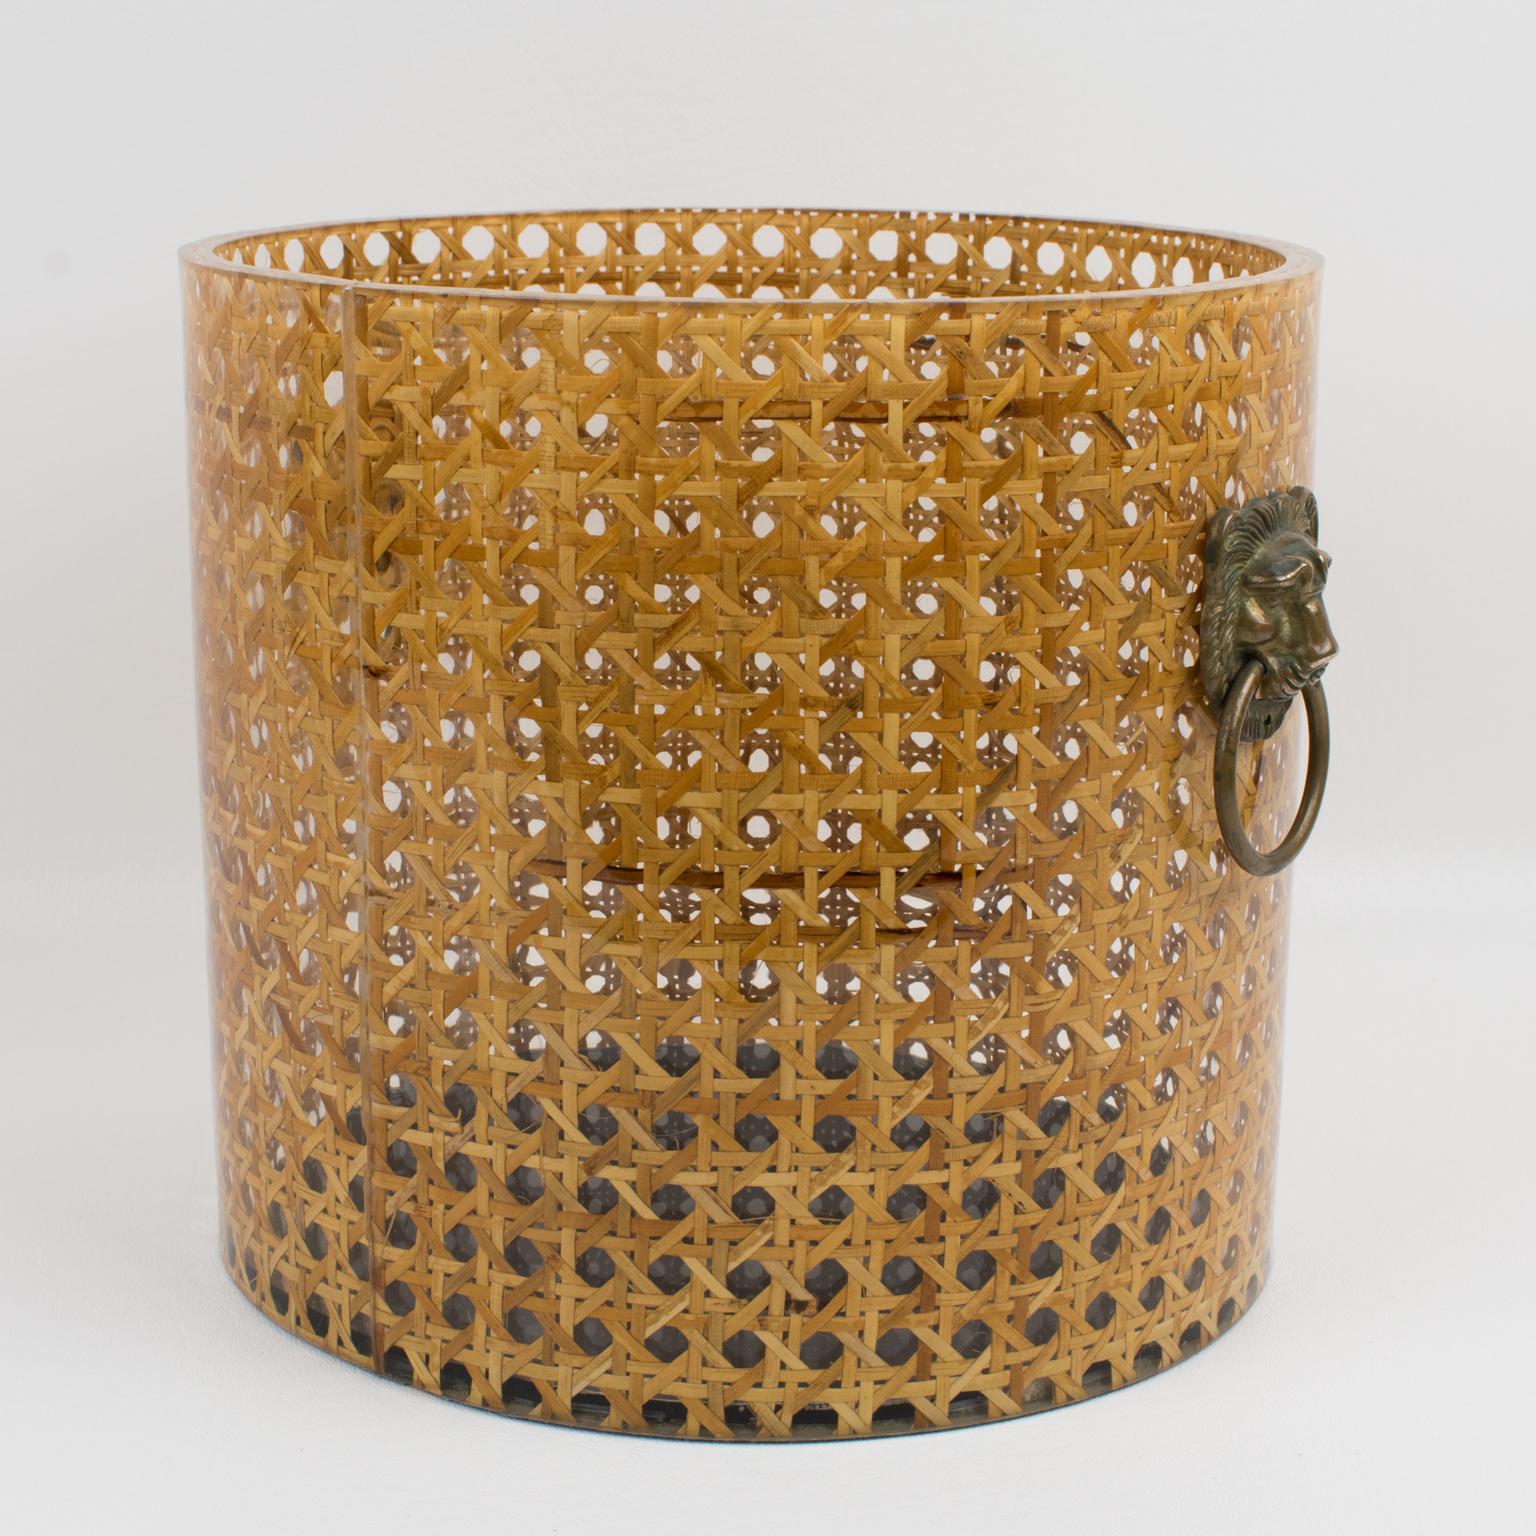 Christian Dior Home Collection 1970s Lucite and Rattan Waste Basket or Planter 1